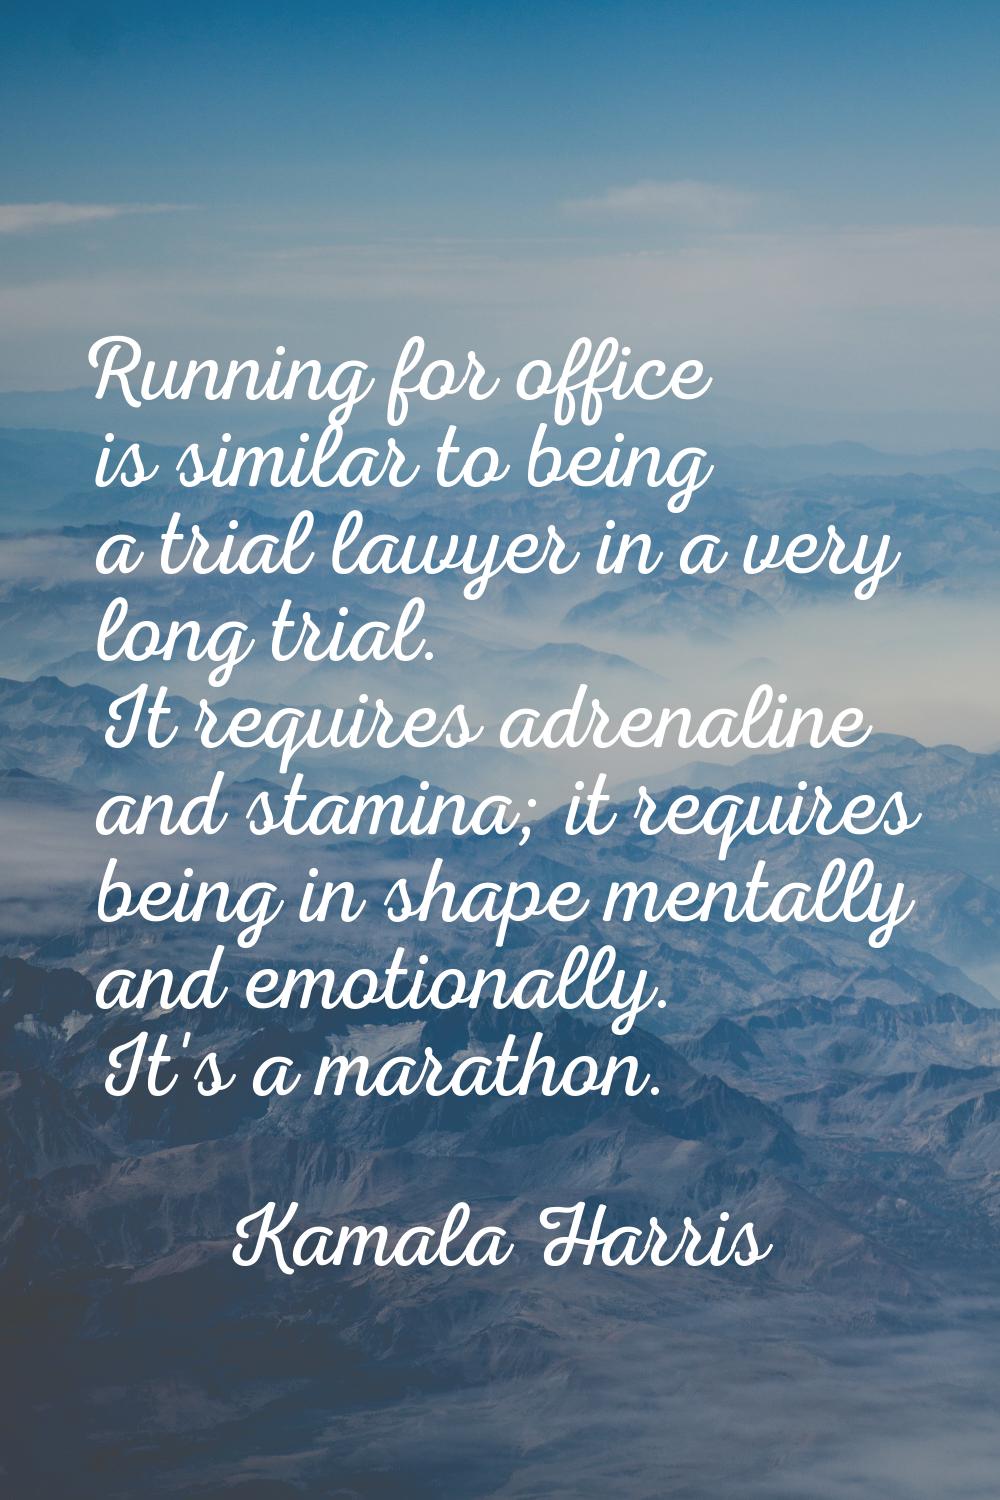 Running for office is similar to being a trial lawyer in a very long trial. It requires adrenaline 